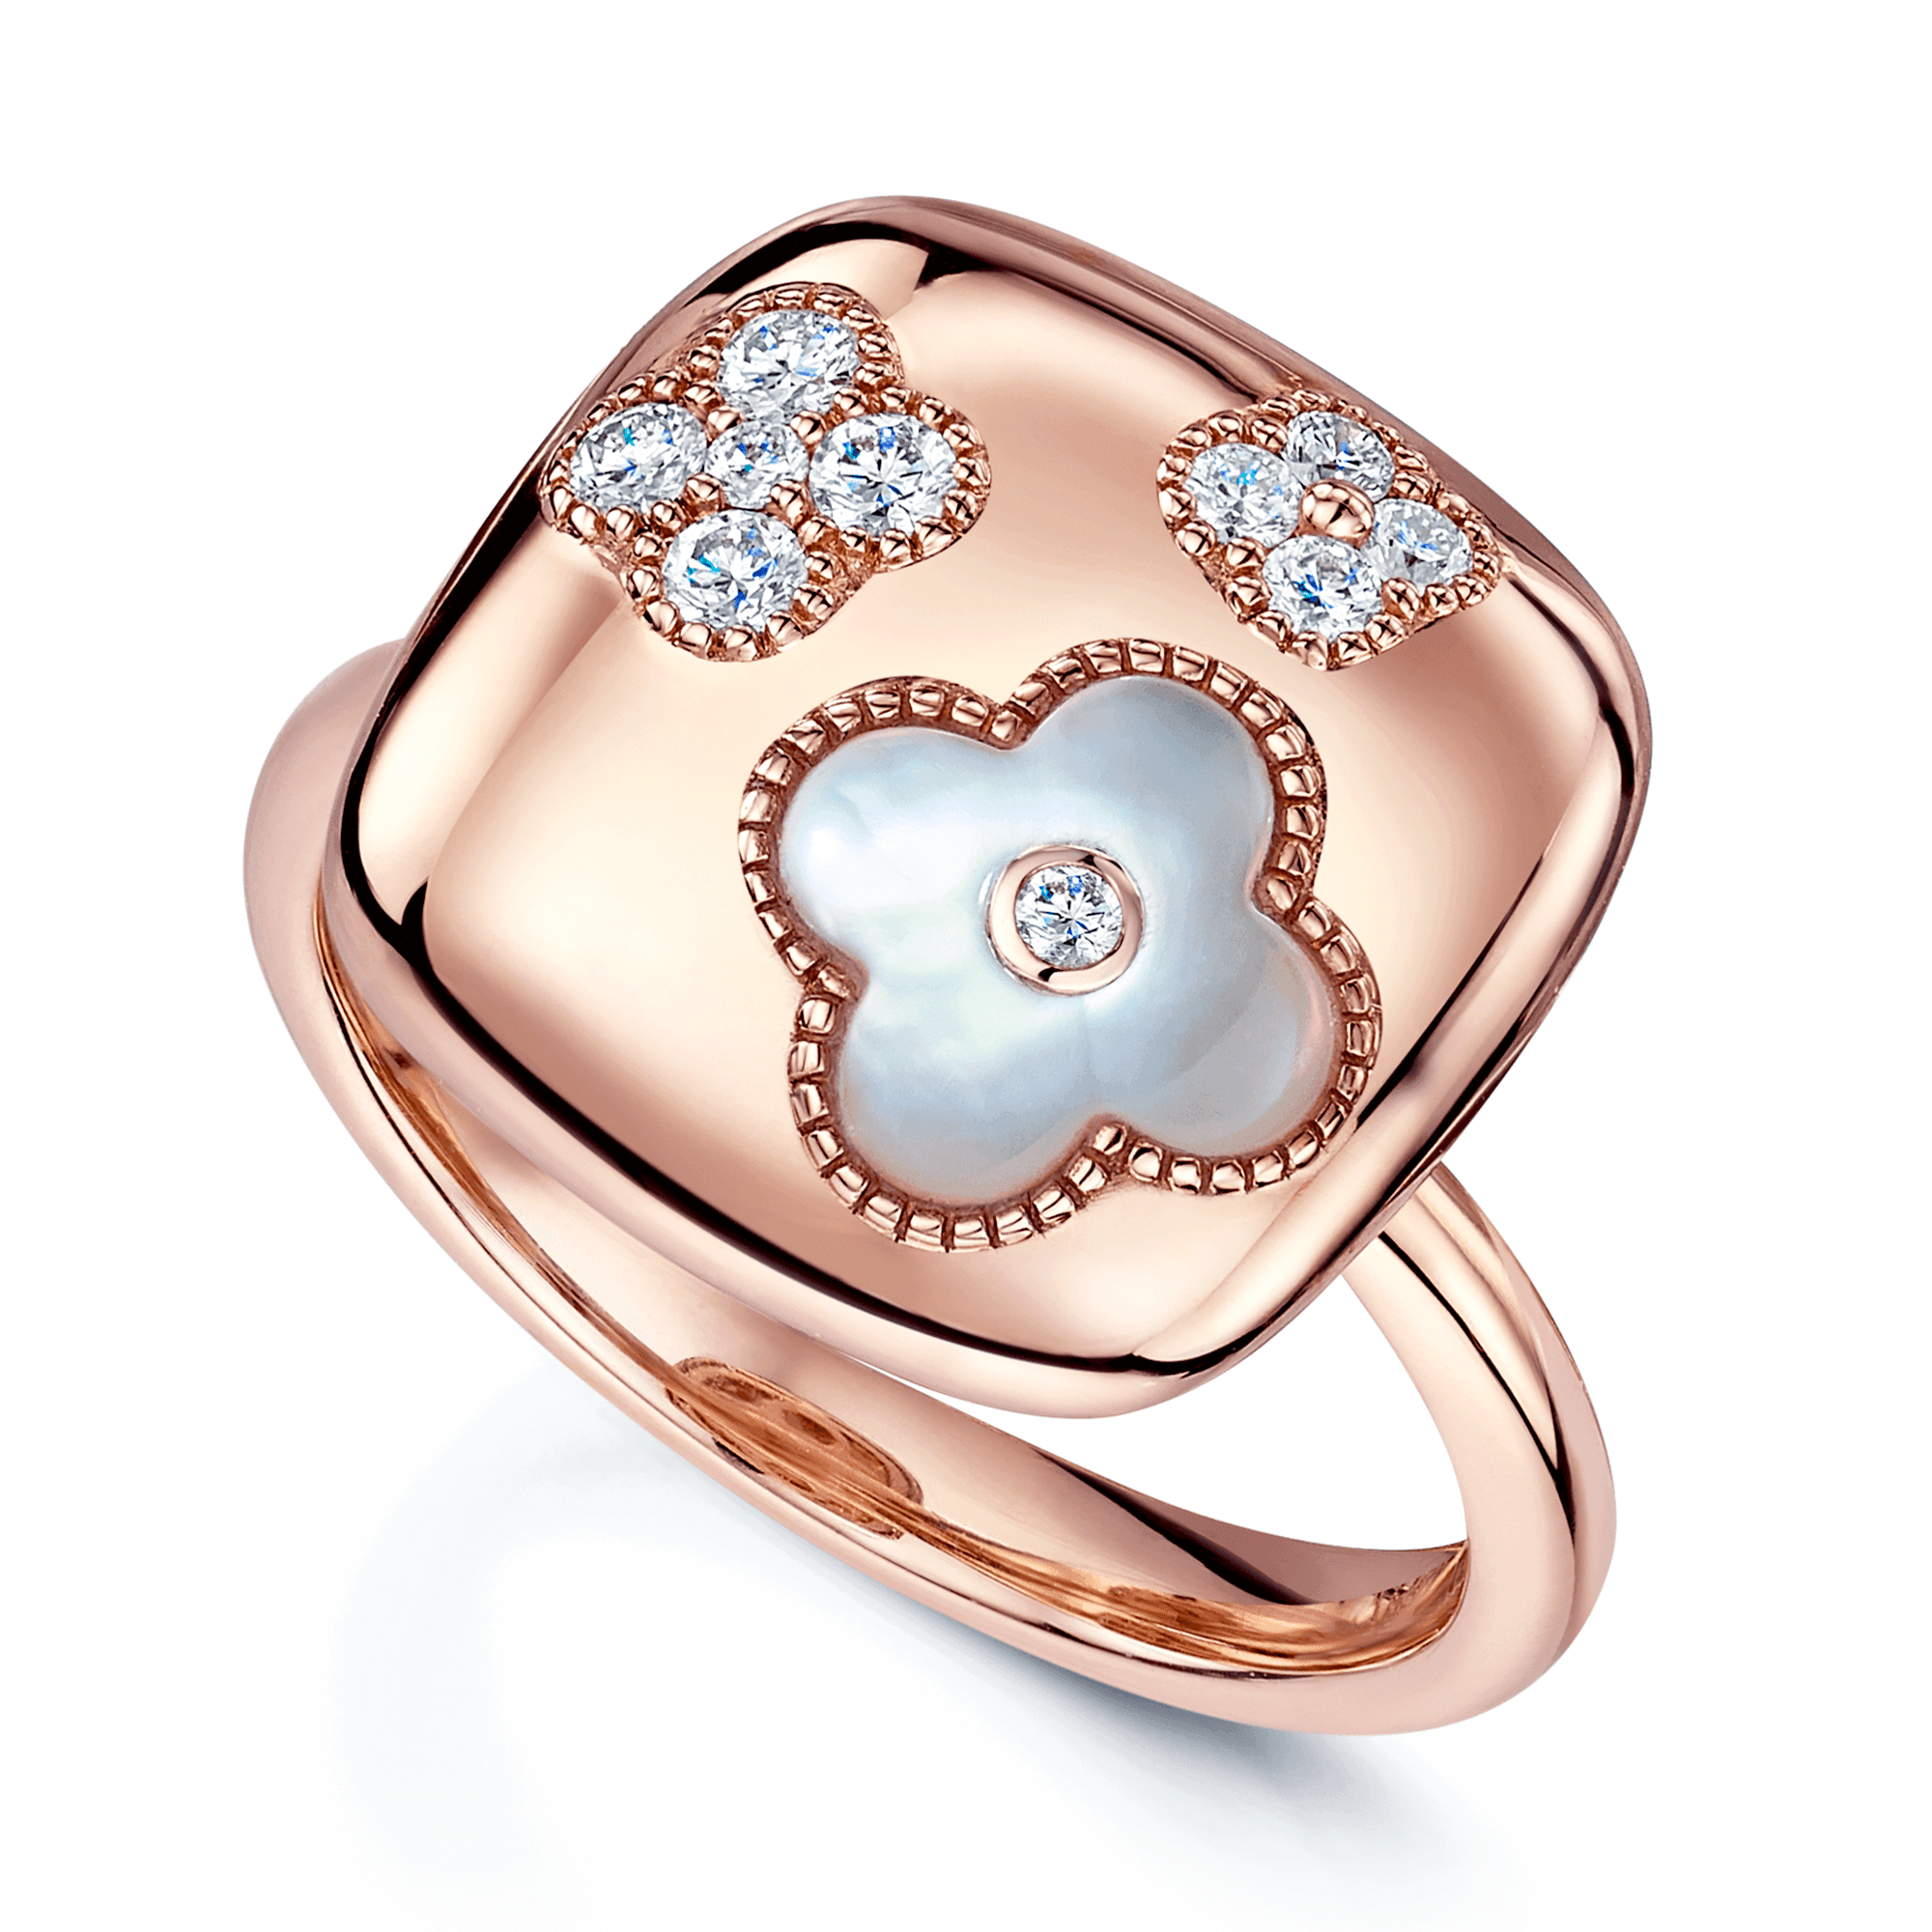 18ct Rose Gold Square Flower Ring With Diamonds and Mother Of Pearl Flower